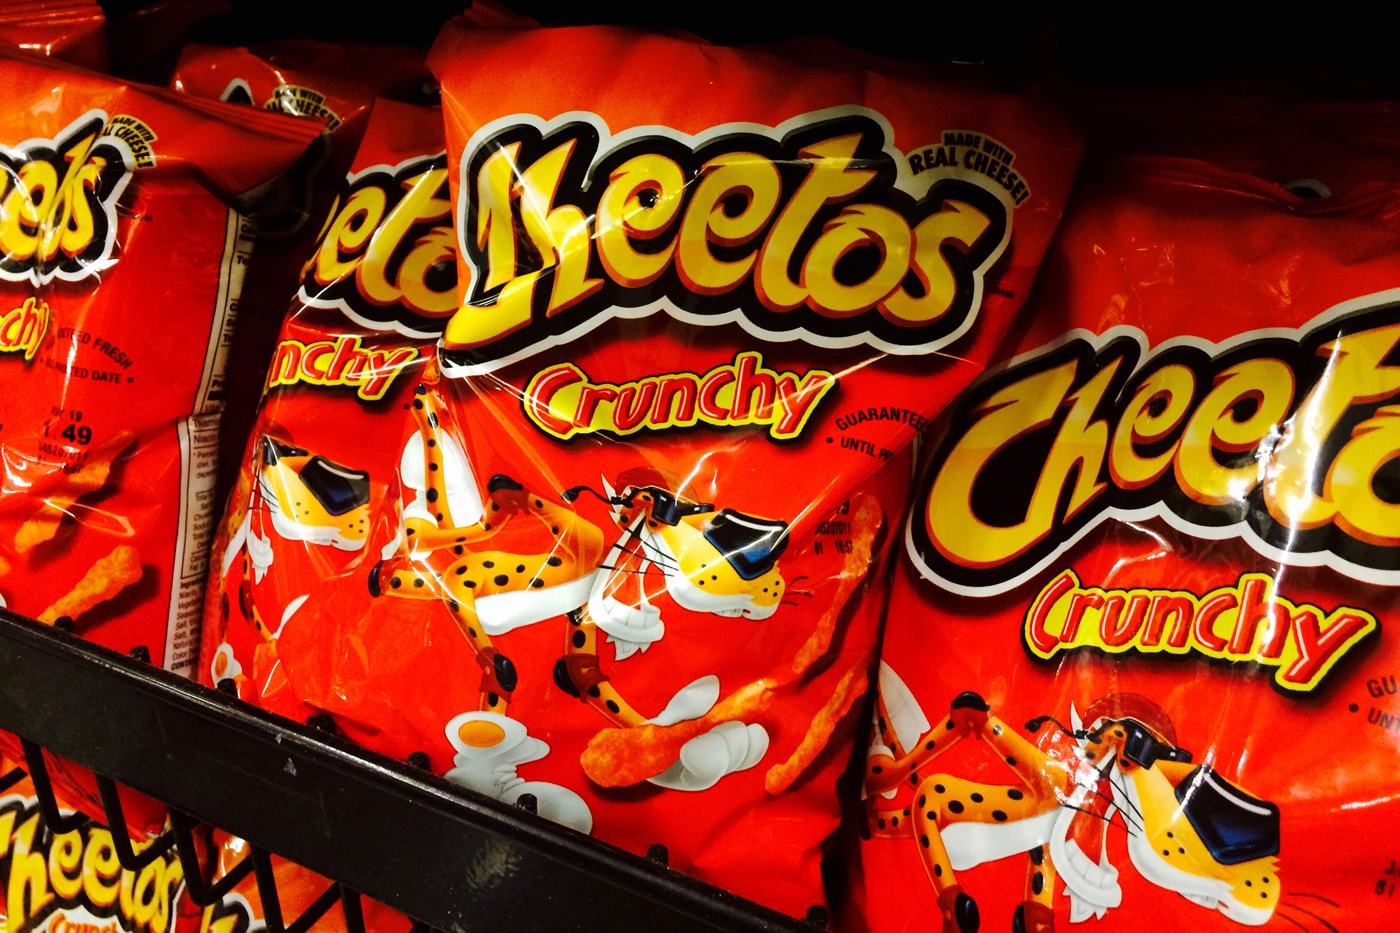 Cheetos Finger Dust Name Reveal Cheetle Info Frito Lay fingers